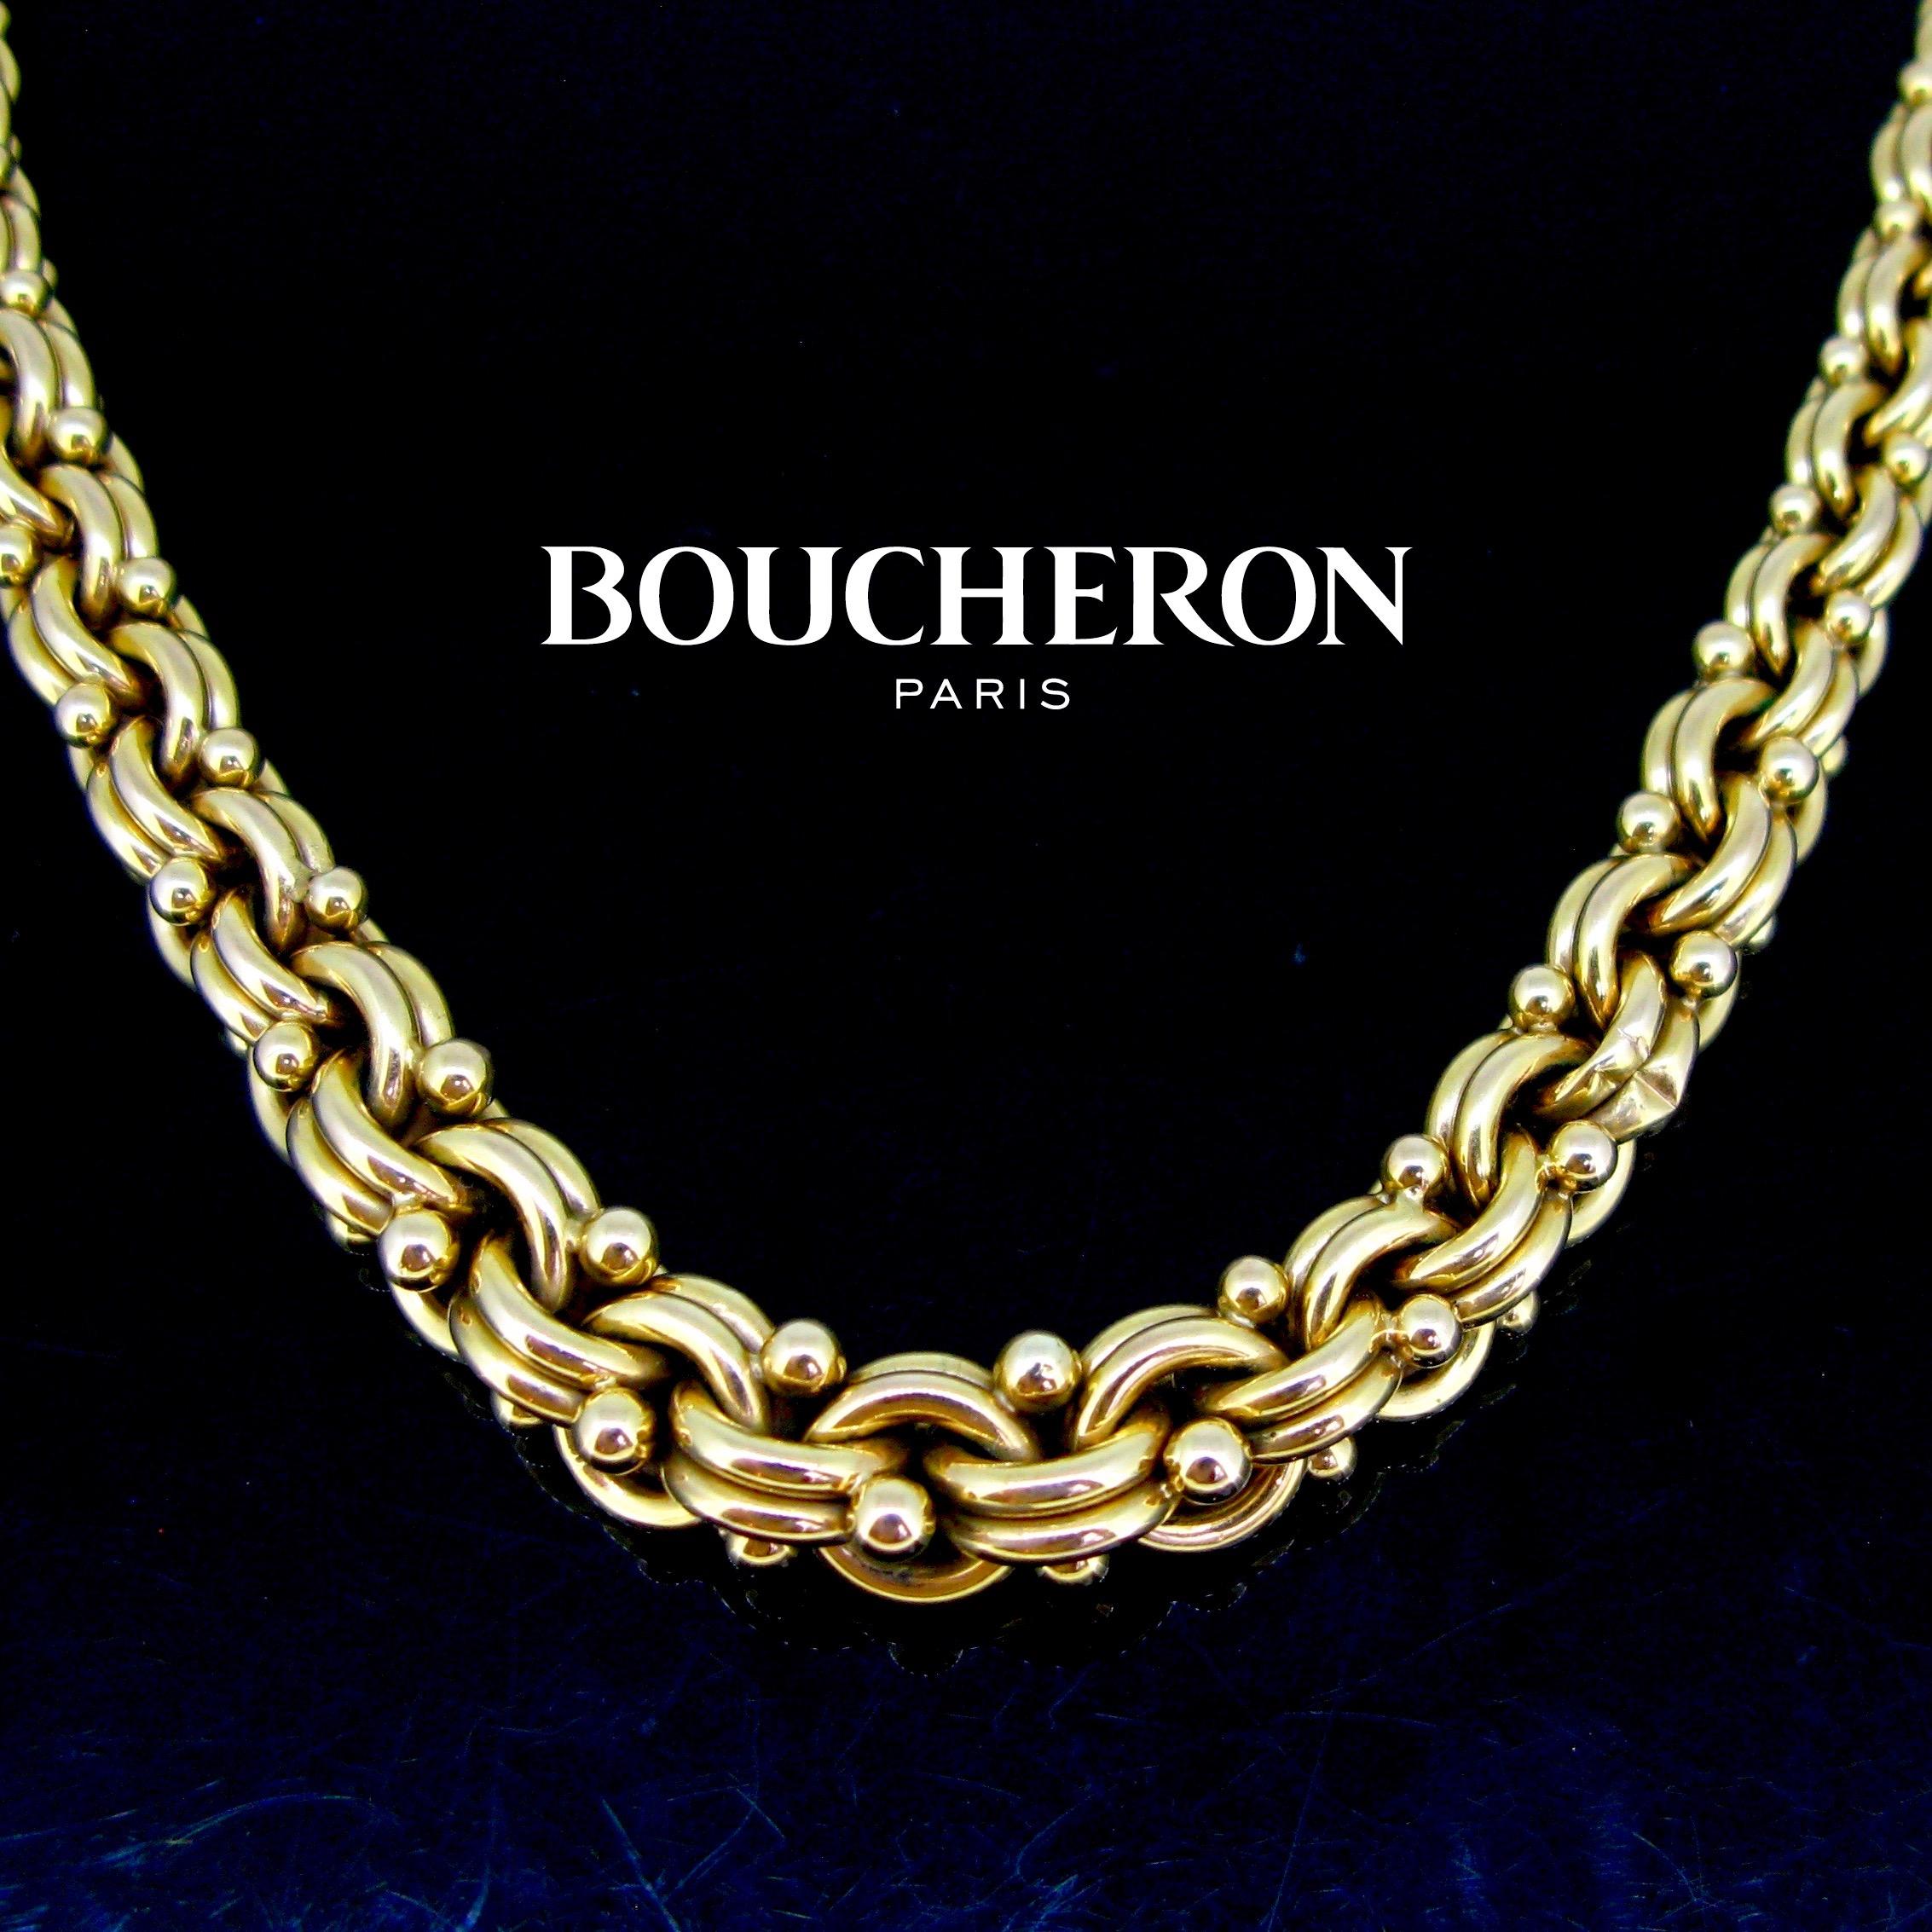 This necklace comes directly from the Retro period. It weighs 60gr and measures 16in / 40cm long. It is made in 18kt yellow gold and comprises double beaded and graduated links. The clasp is numbered signed Boucheron. It has been controlled by the